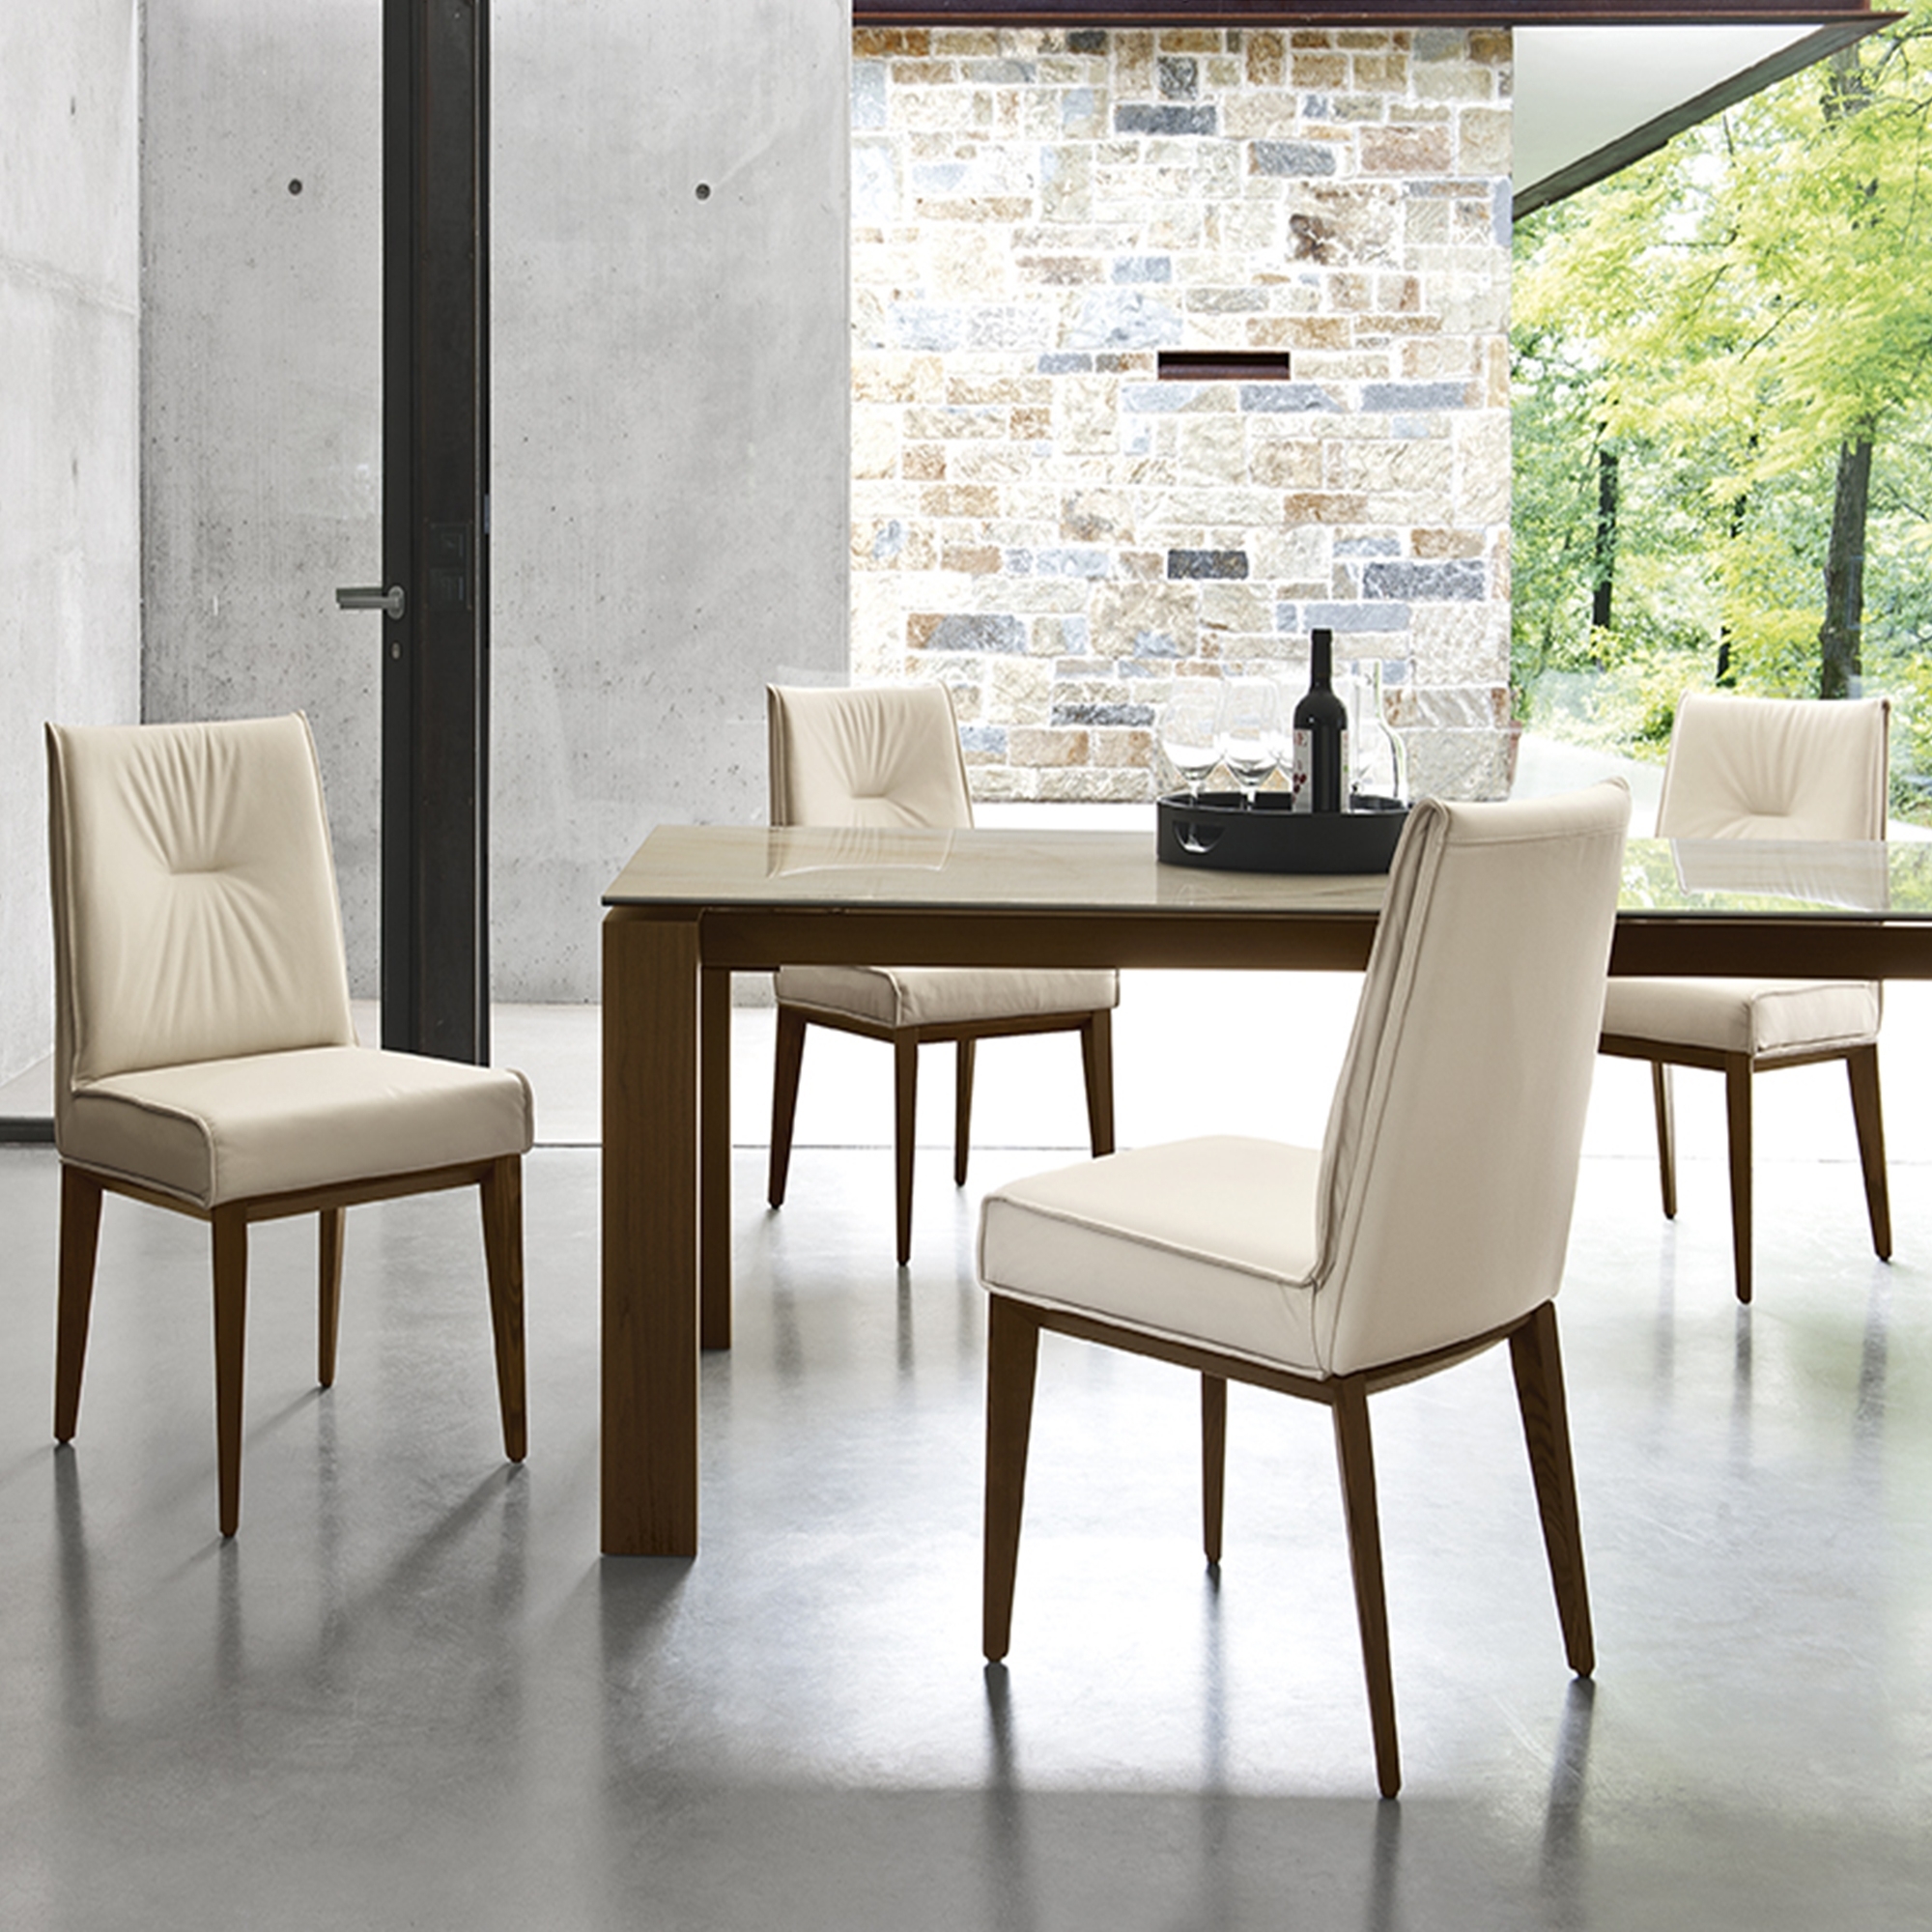 Tables Calligaris Omnia Dining Table and Chairs - Calligaris